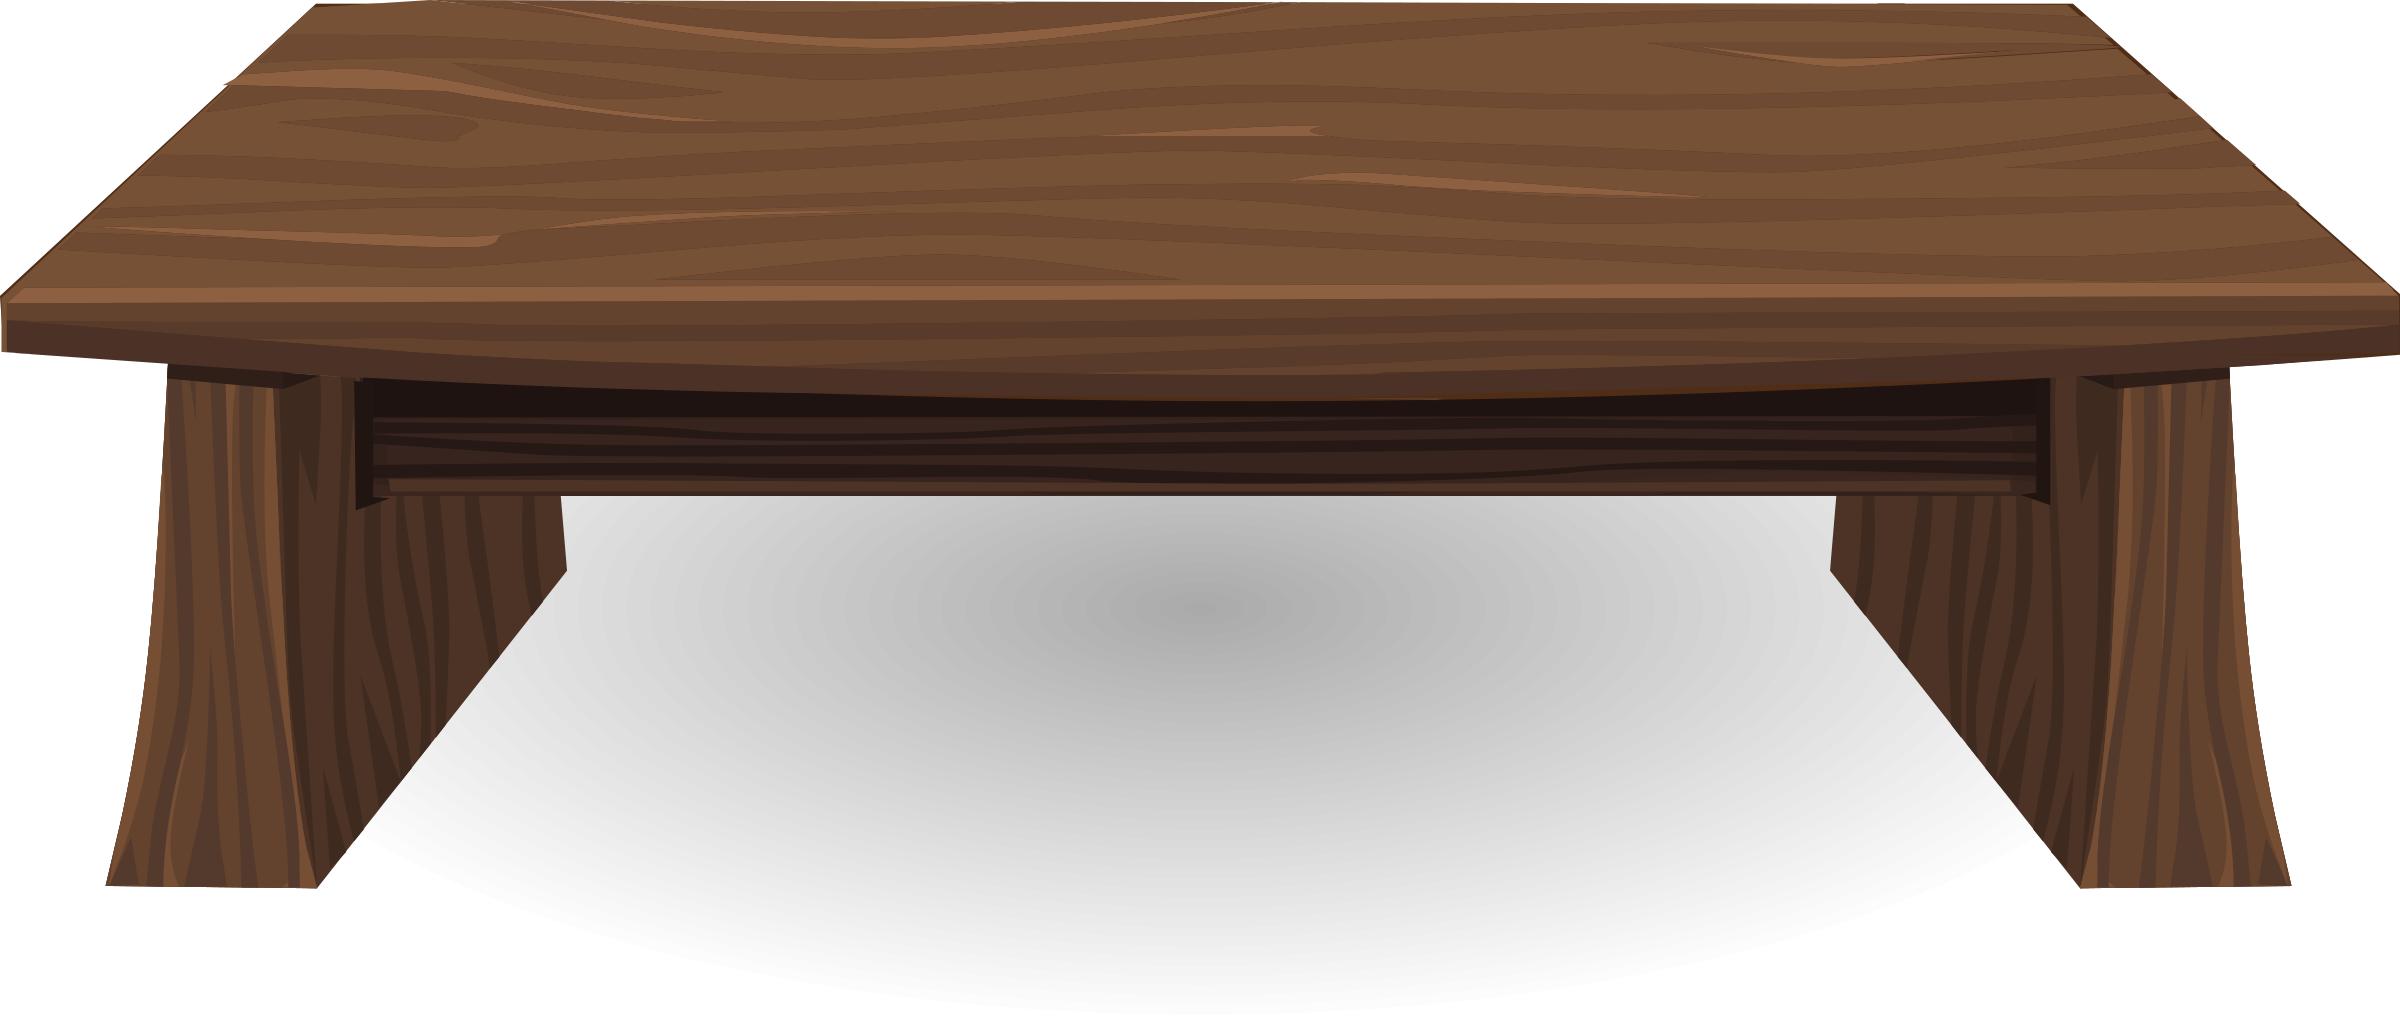 Consulate Great Around Wooden table from Glitch Icons PNG - Free PNG and Icons Downloads